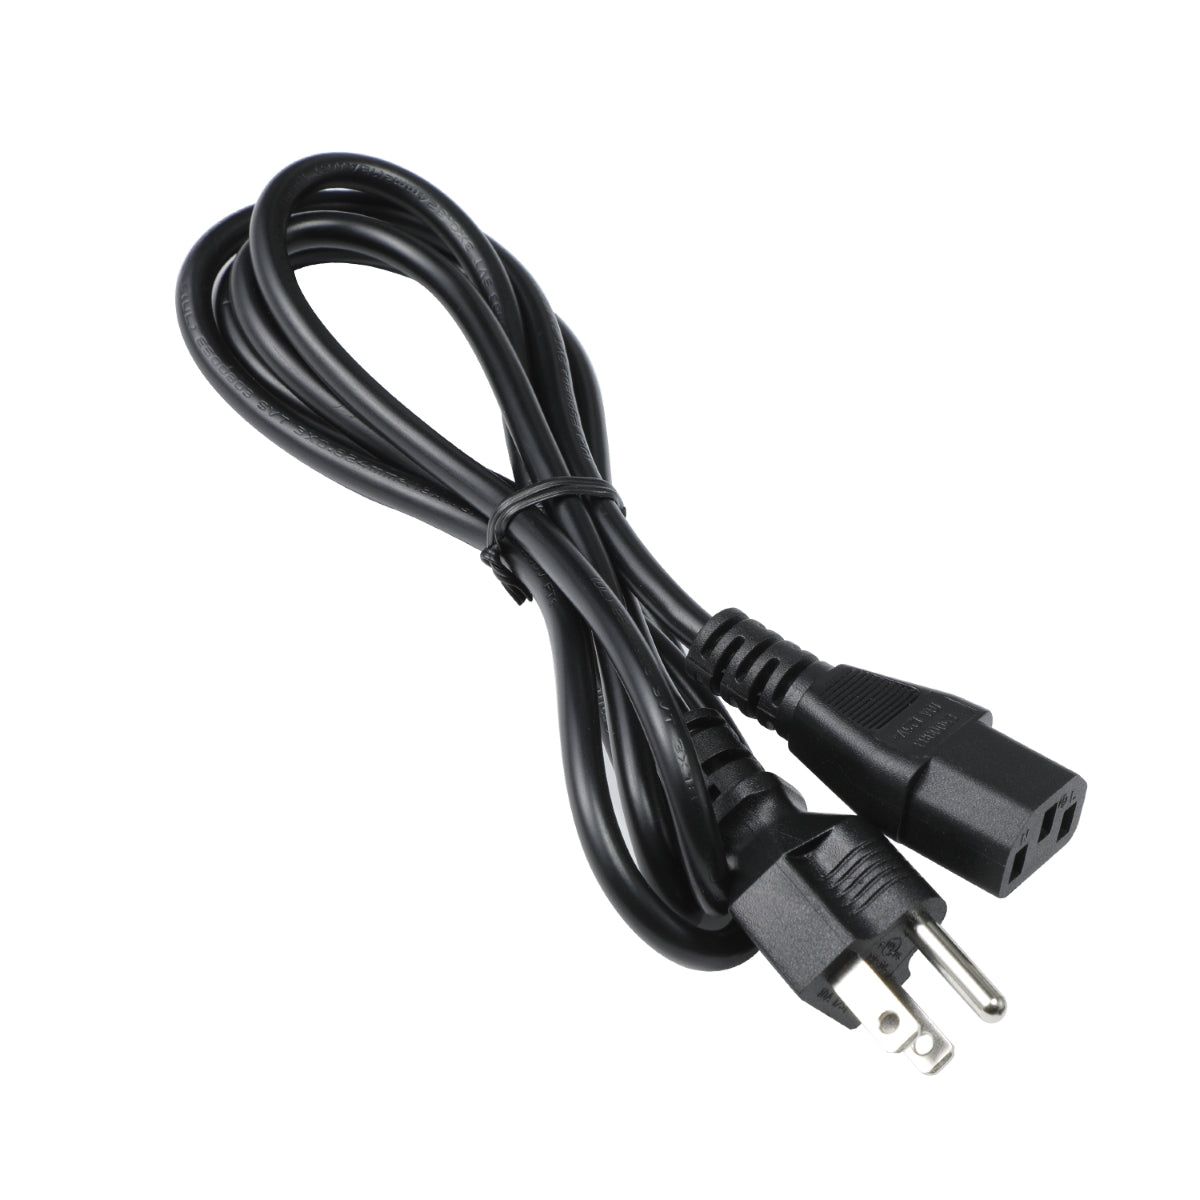 Power Cord for HP ProDesk 600 G6 Microtower SFF Desktop PC.